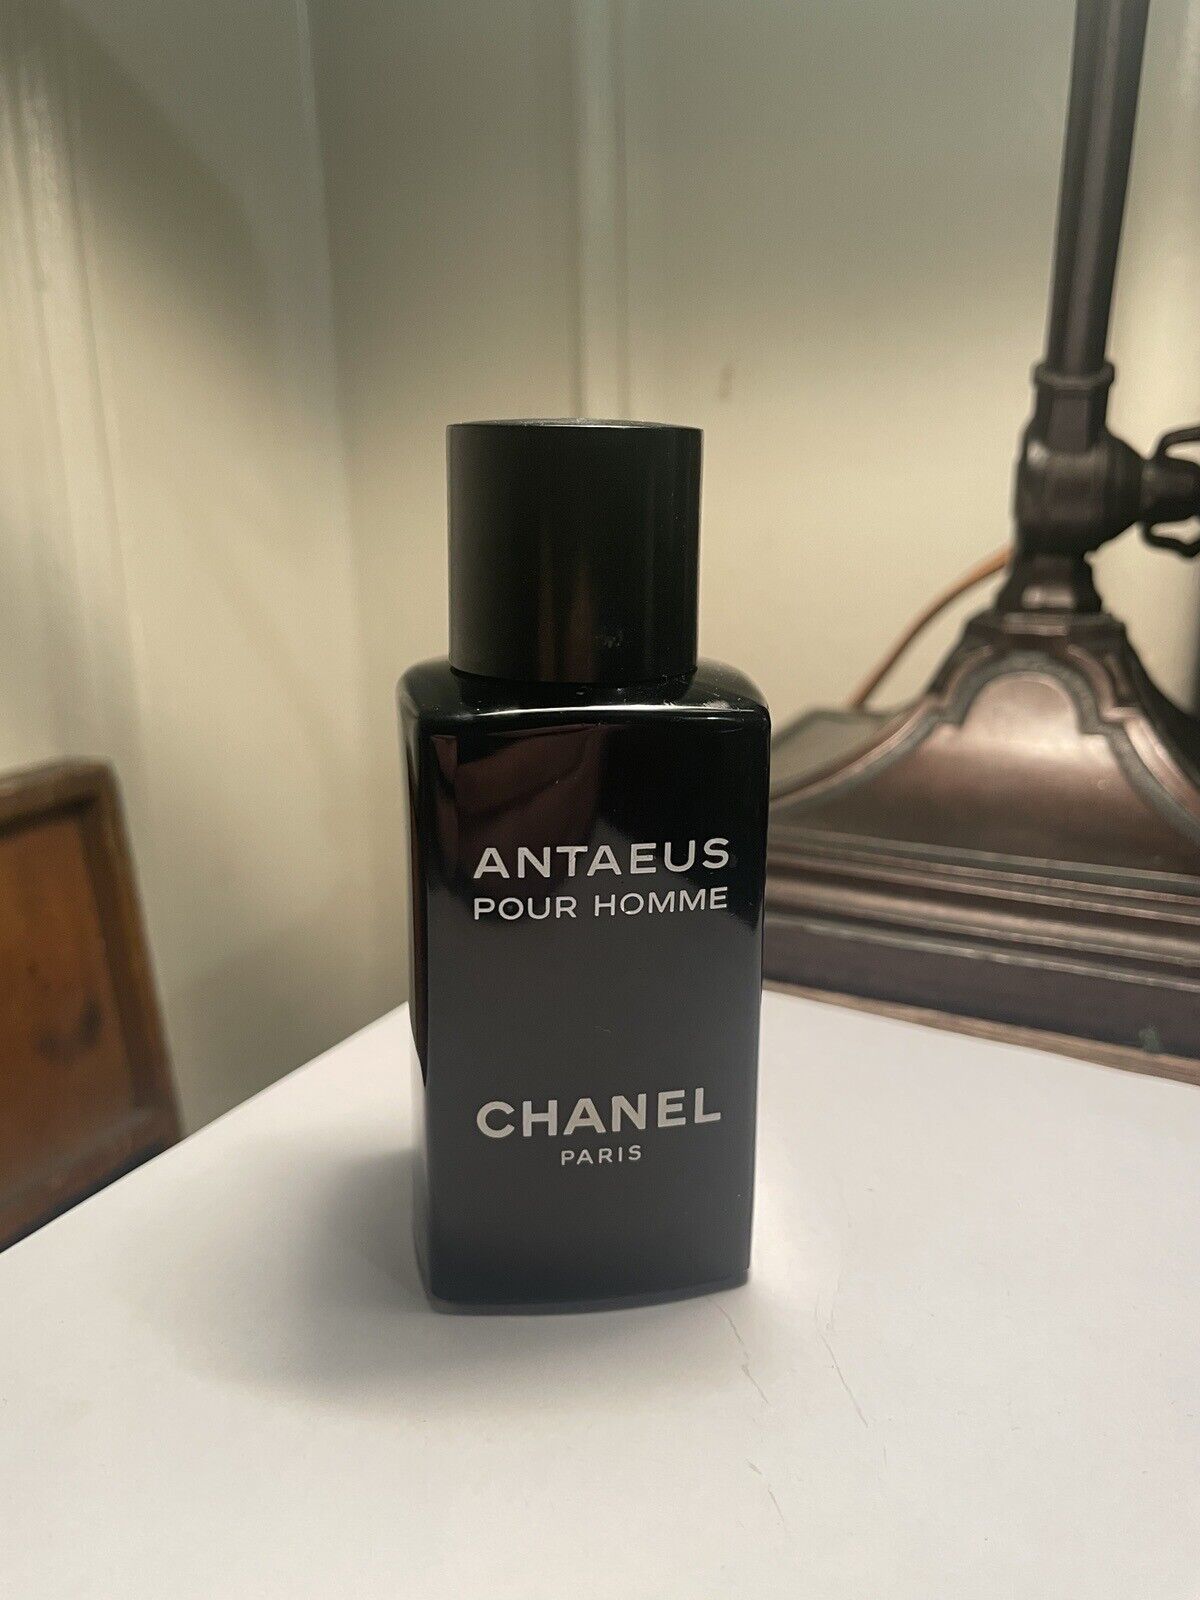 Vintage Antaeus Pour Homme By Chanel After-Shave, 85% Full of 100ml 3.3oz